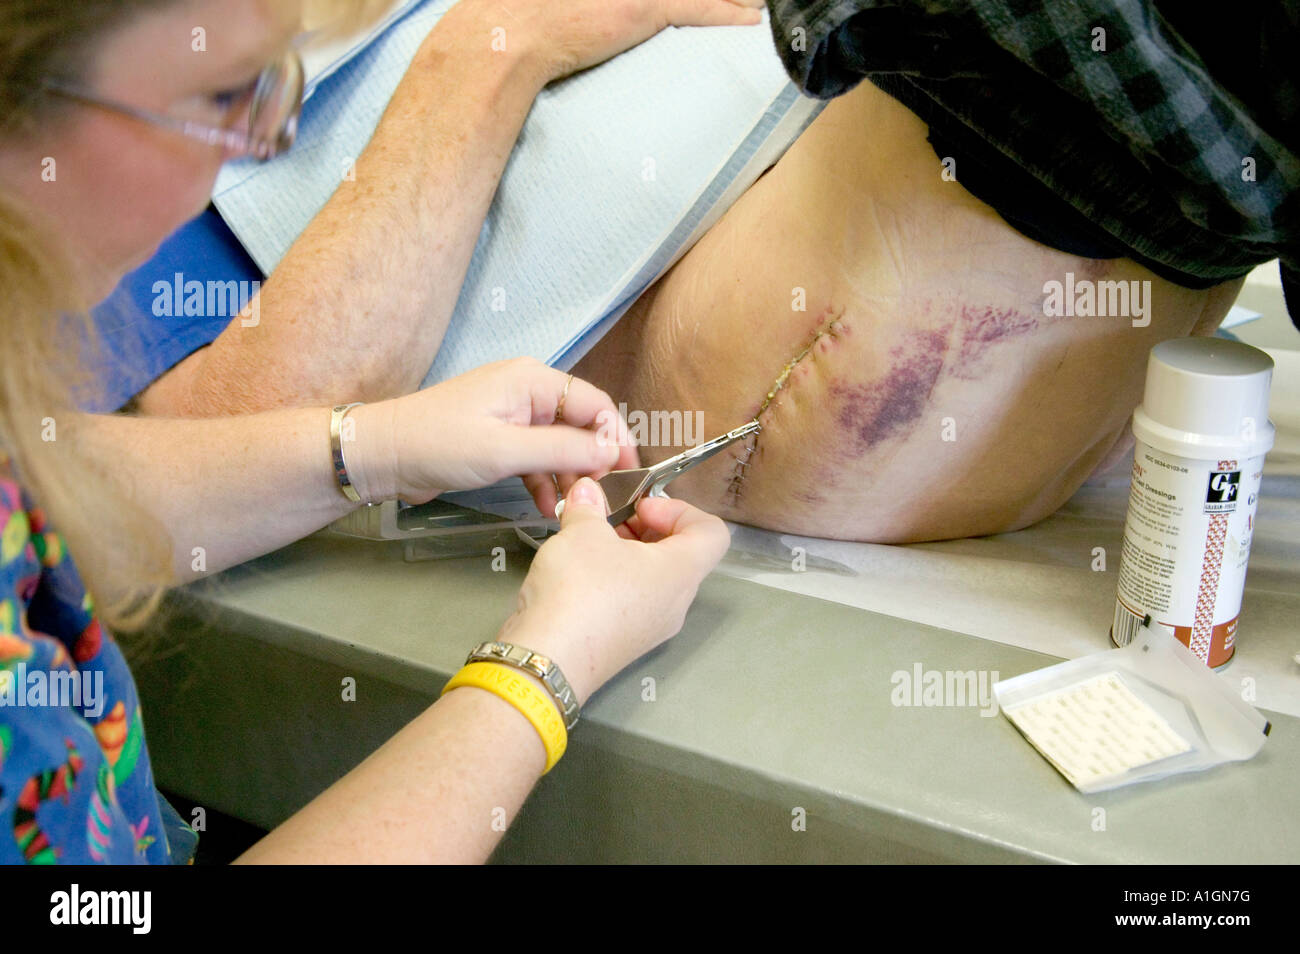 nurse, hip, staplesNurse removing stainless steel surgical staples from  total right hip arthroplasty. Stock Photo